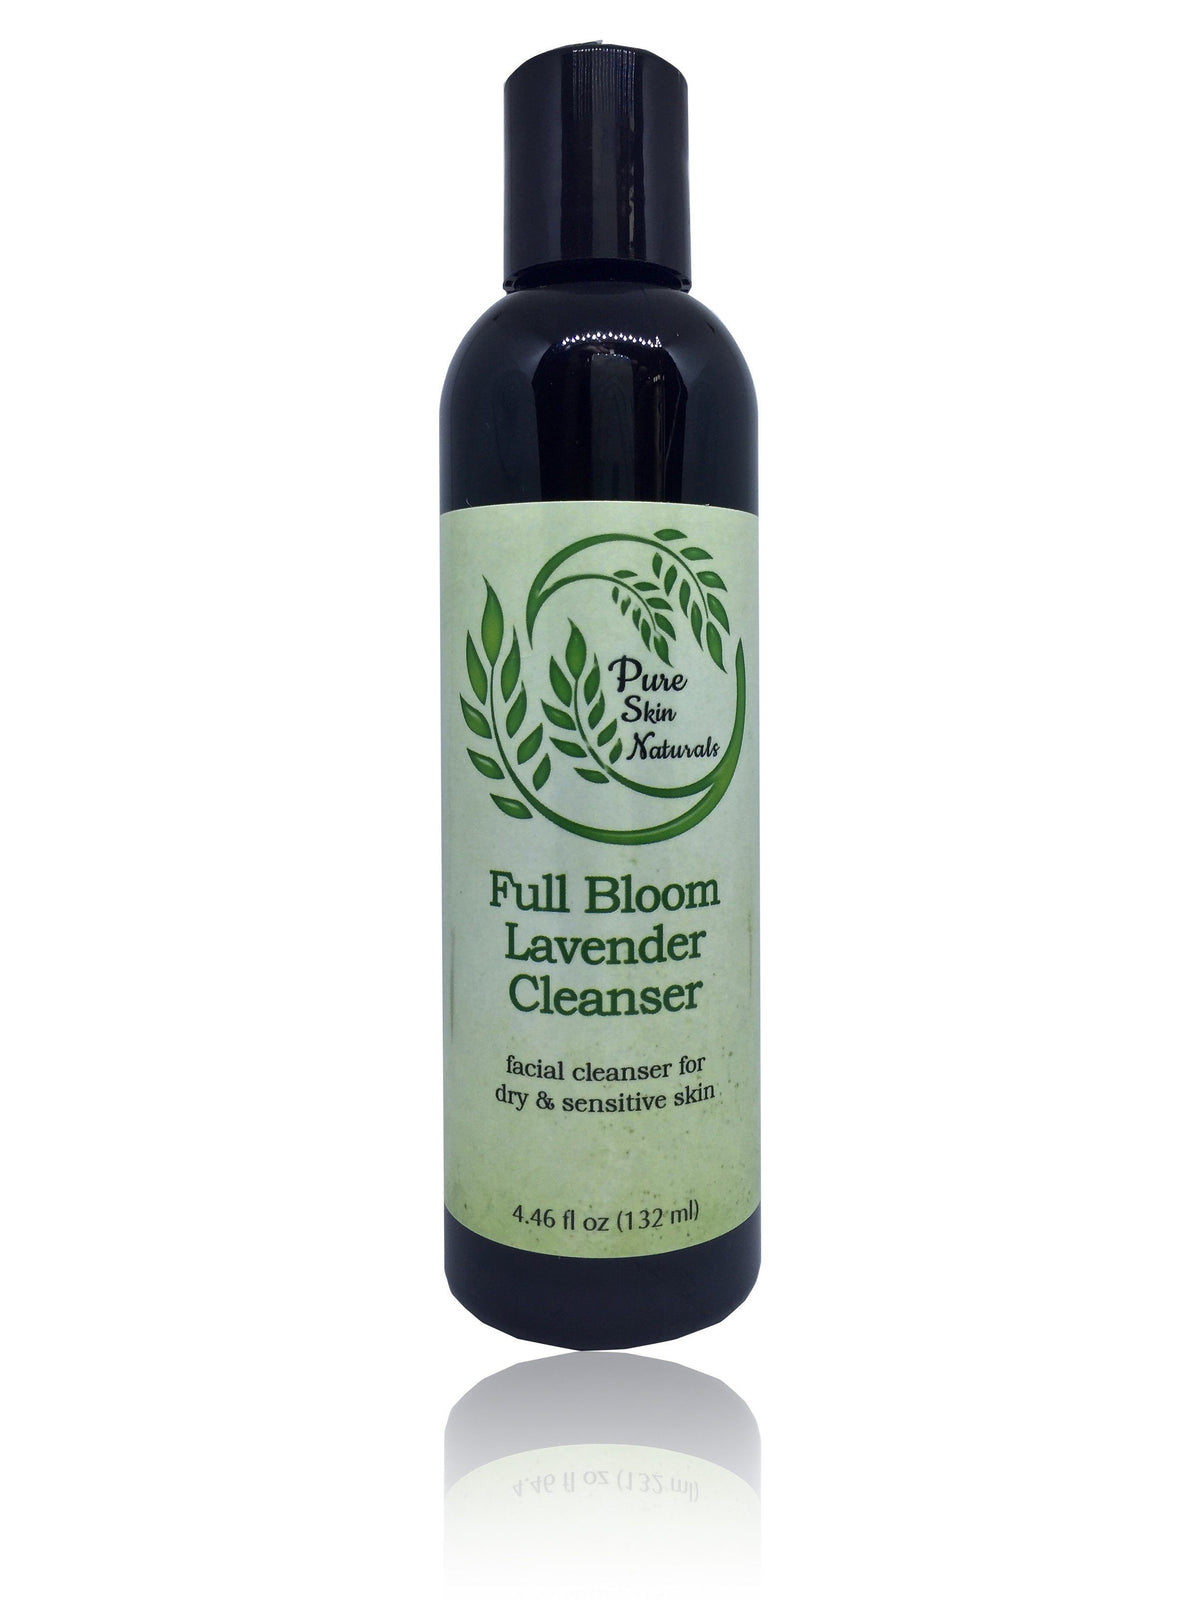 Full Bloom Lavender Facial Cleanser for Dry and Sensitive Skin